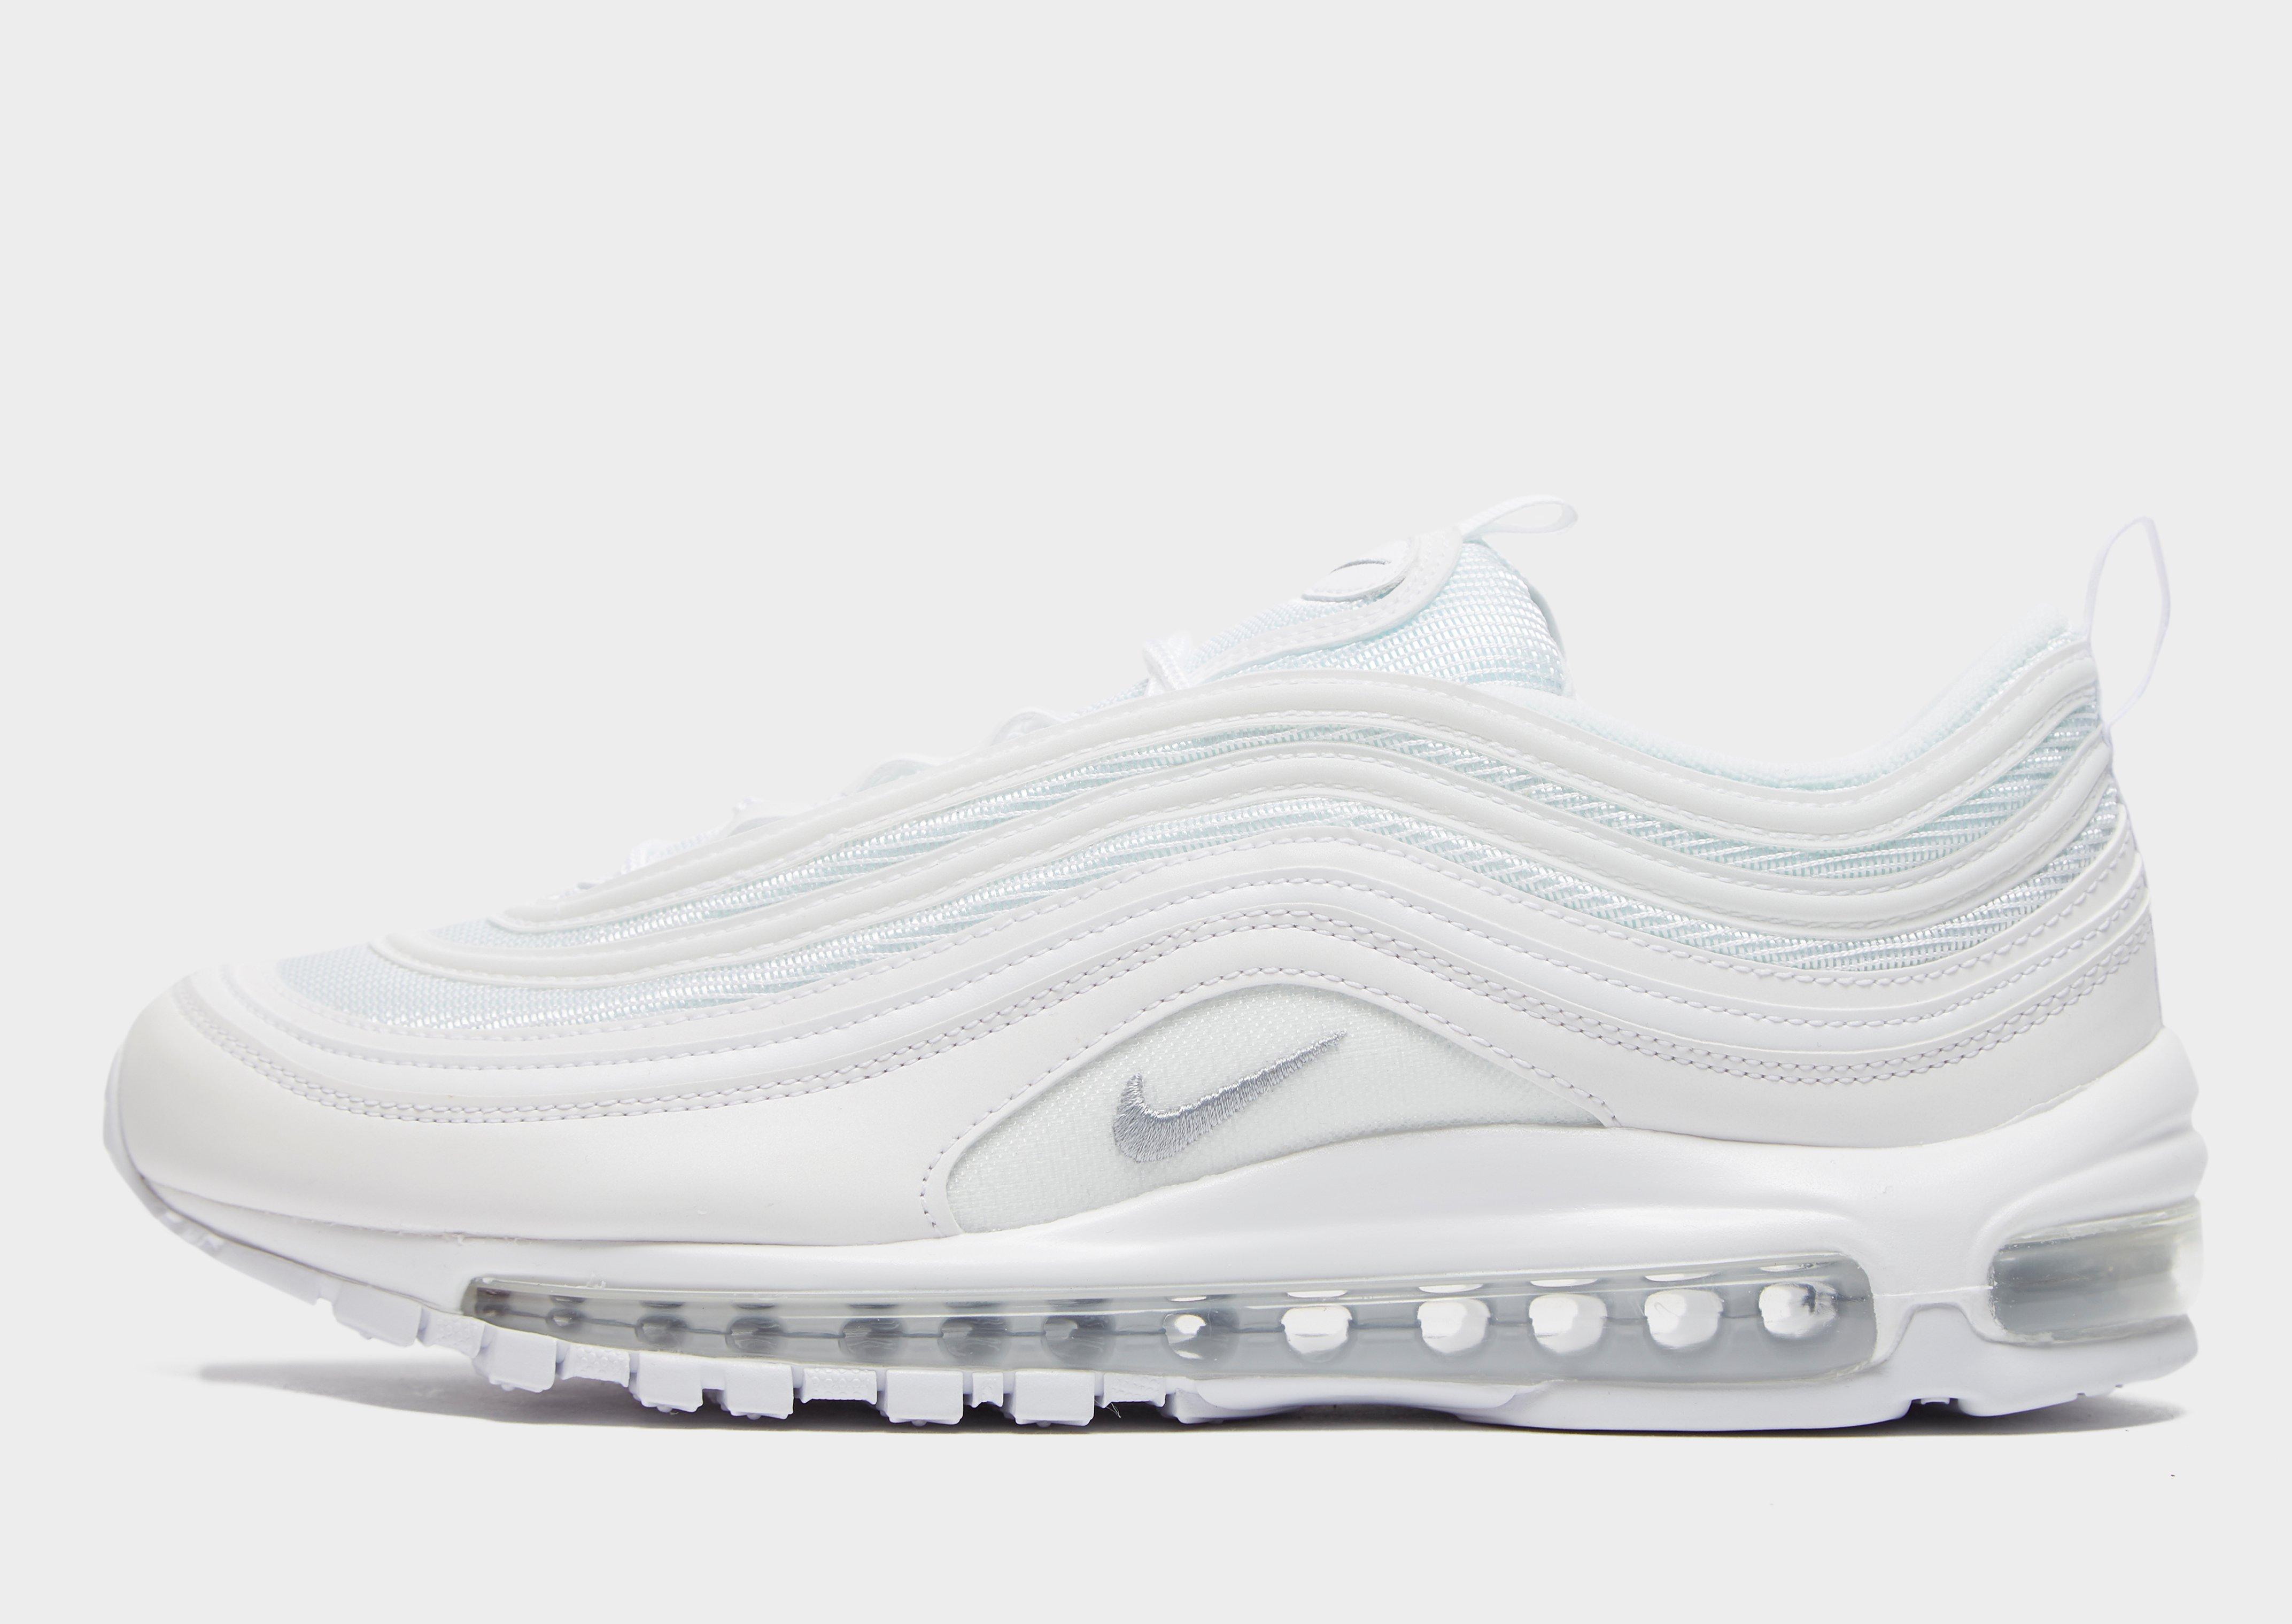 10 Best Nike Womens Air Vapormax 97 Reviewed and Rated